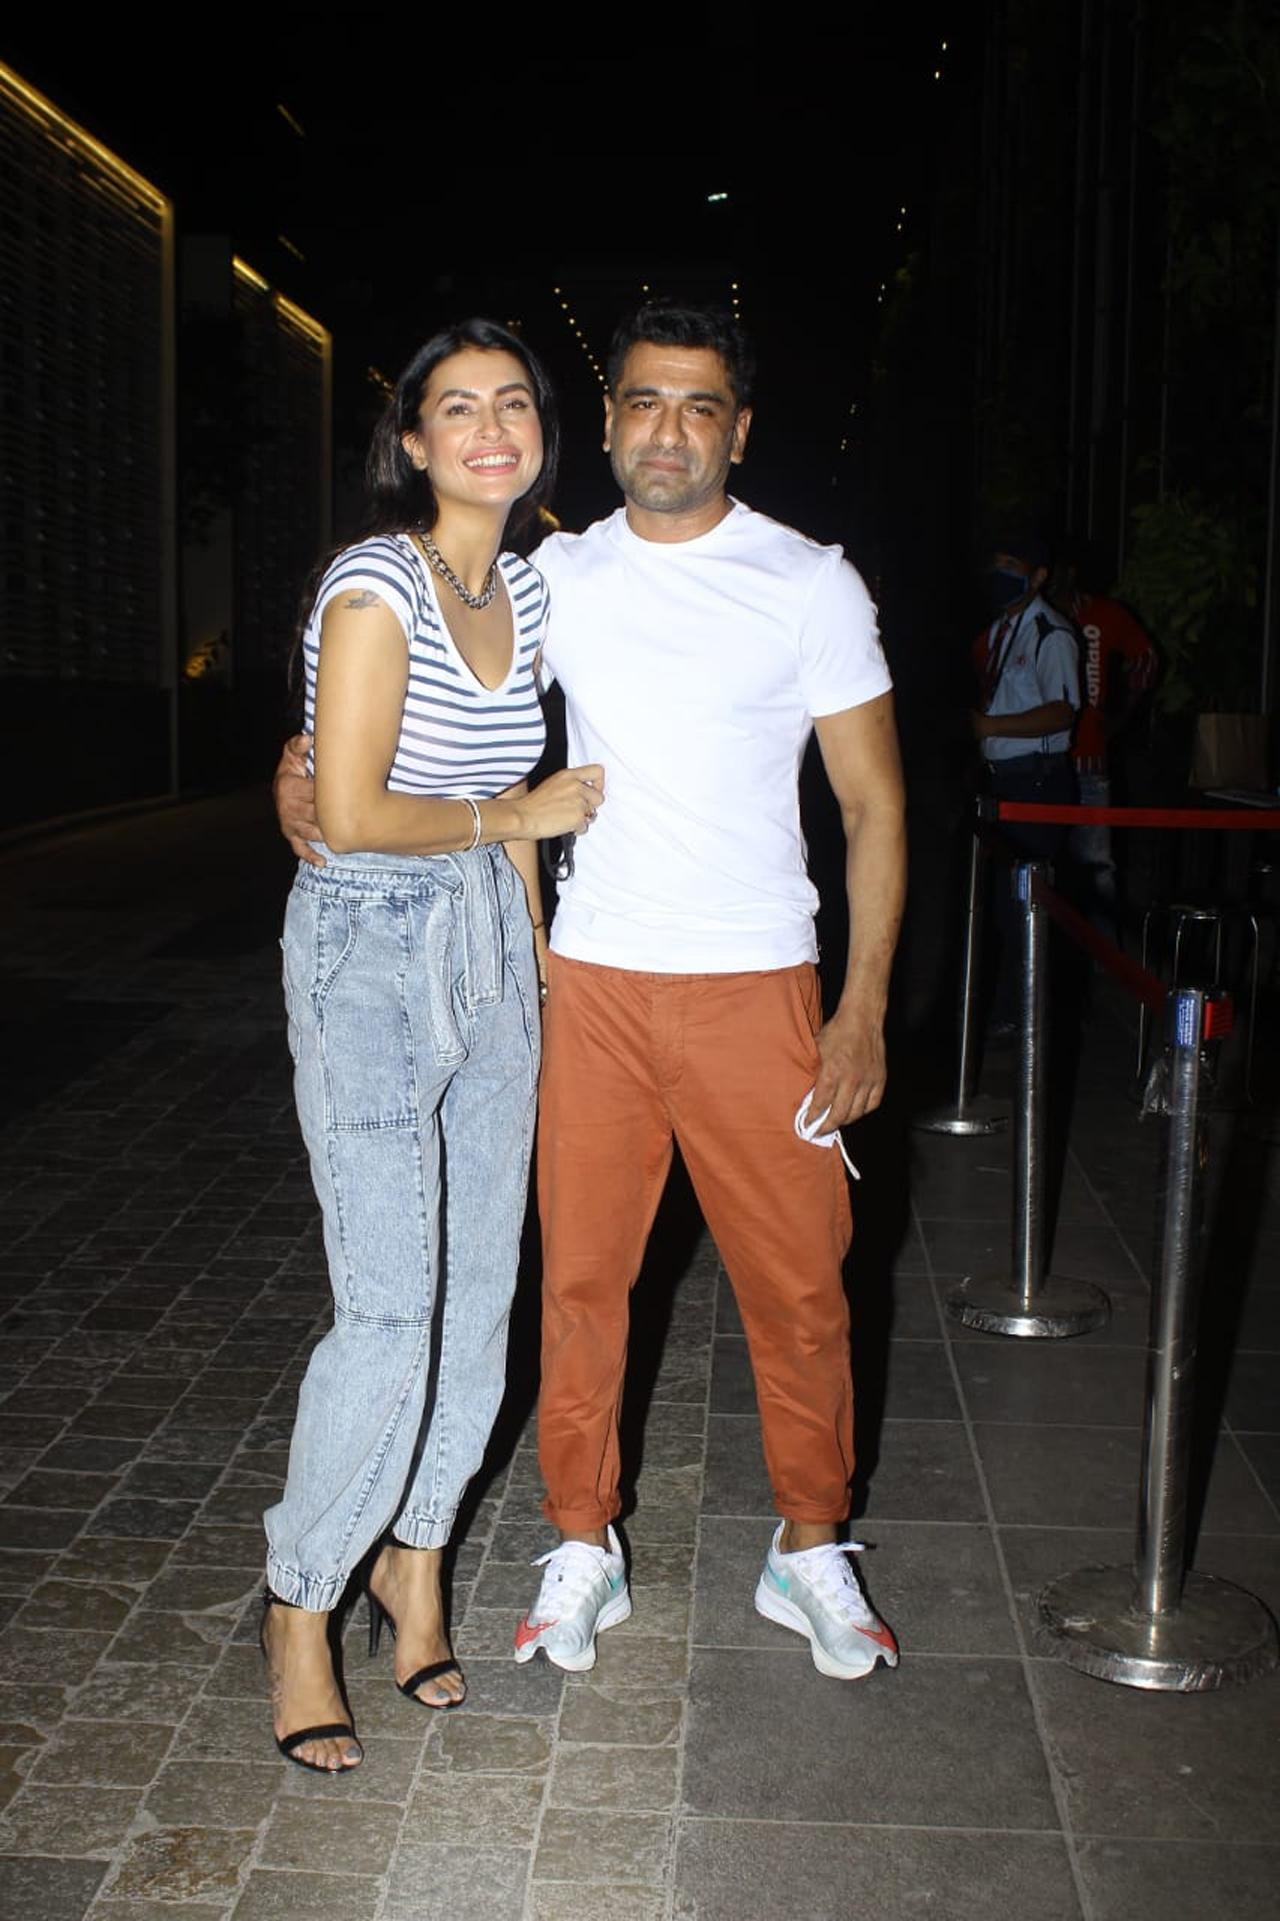 The two met on Bigg Boss Season 14 and started dating soon afterwards. While Eijaz was single when he entered the Bigg Boss house with no plans of getting into a relationship, his bond with Pavitra grew over time in the show. They shared a love-hate relationship in the show and were also seen to be at loggerheads with each other. Pavitra and Eijaz do not shy away from media attention and are often spotted together.